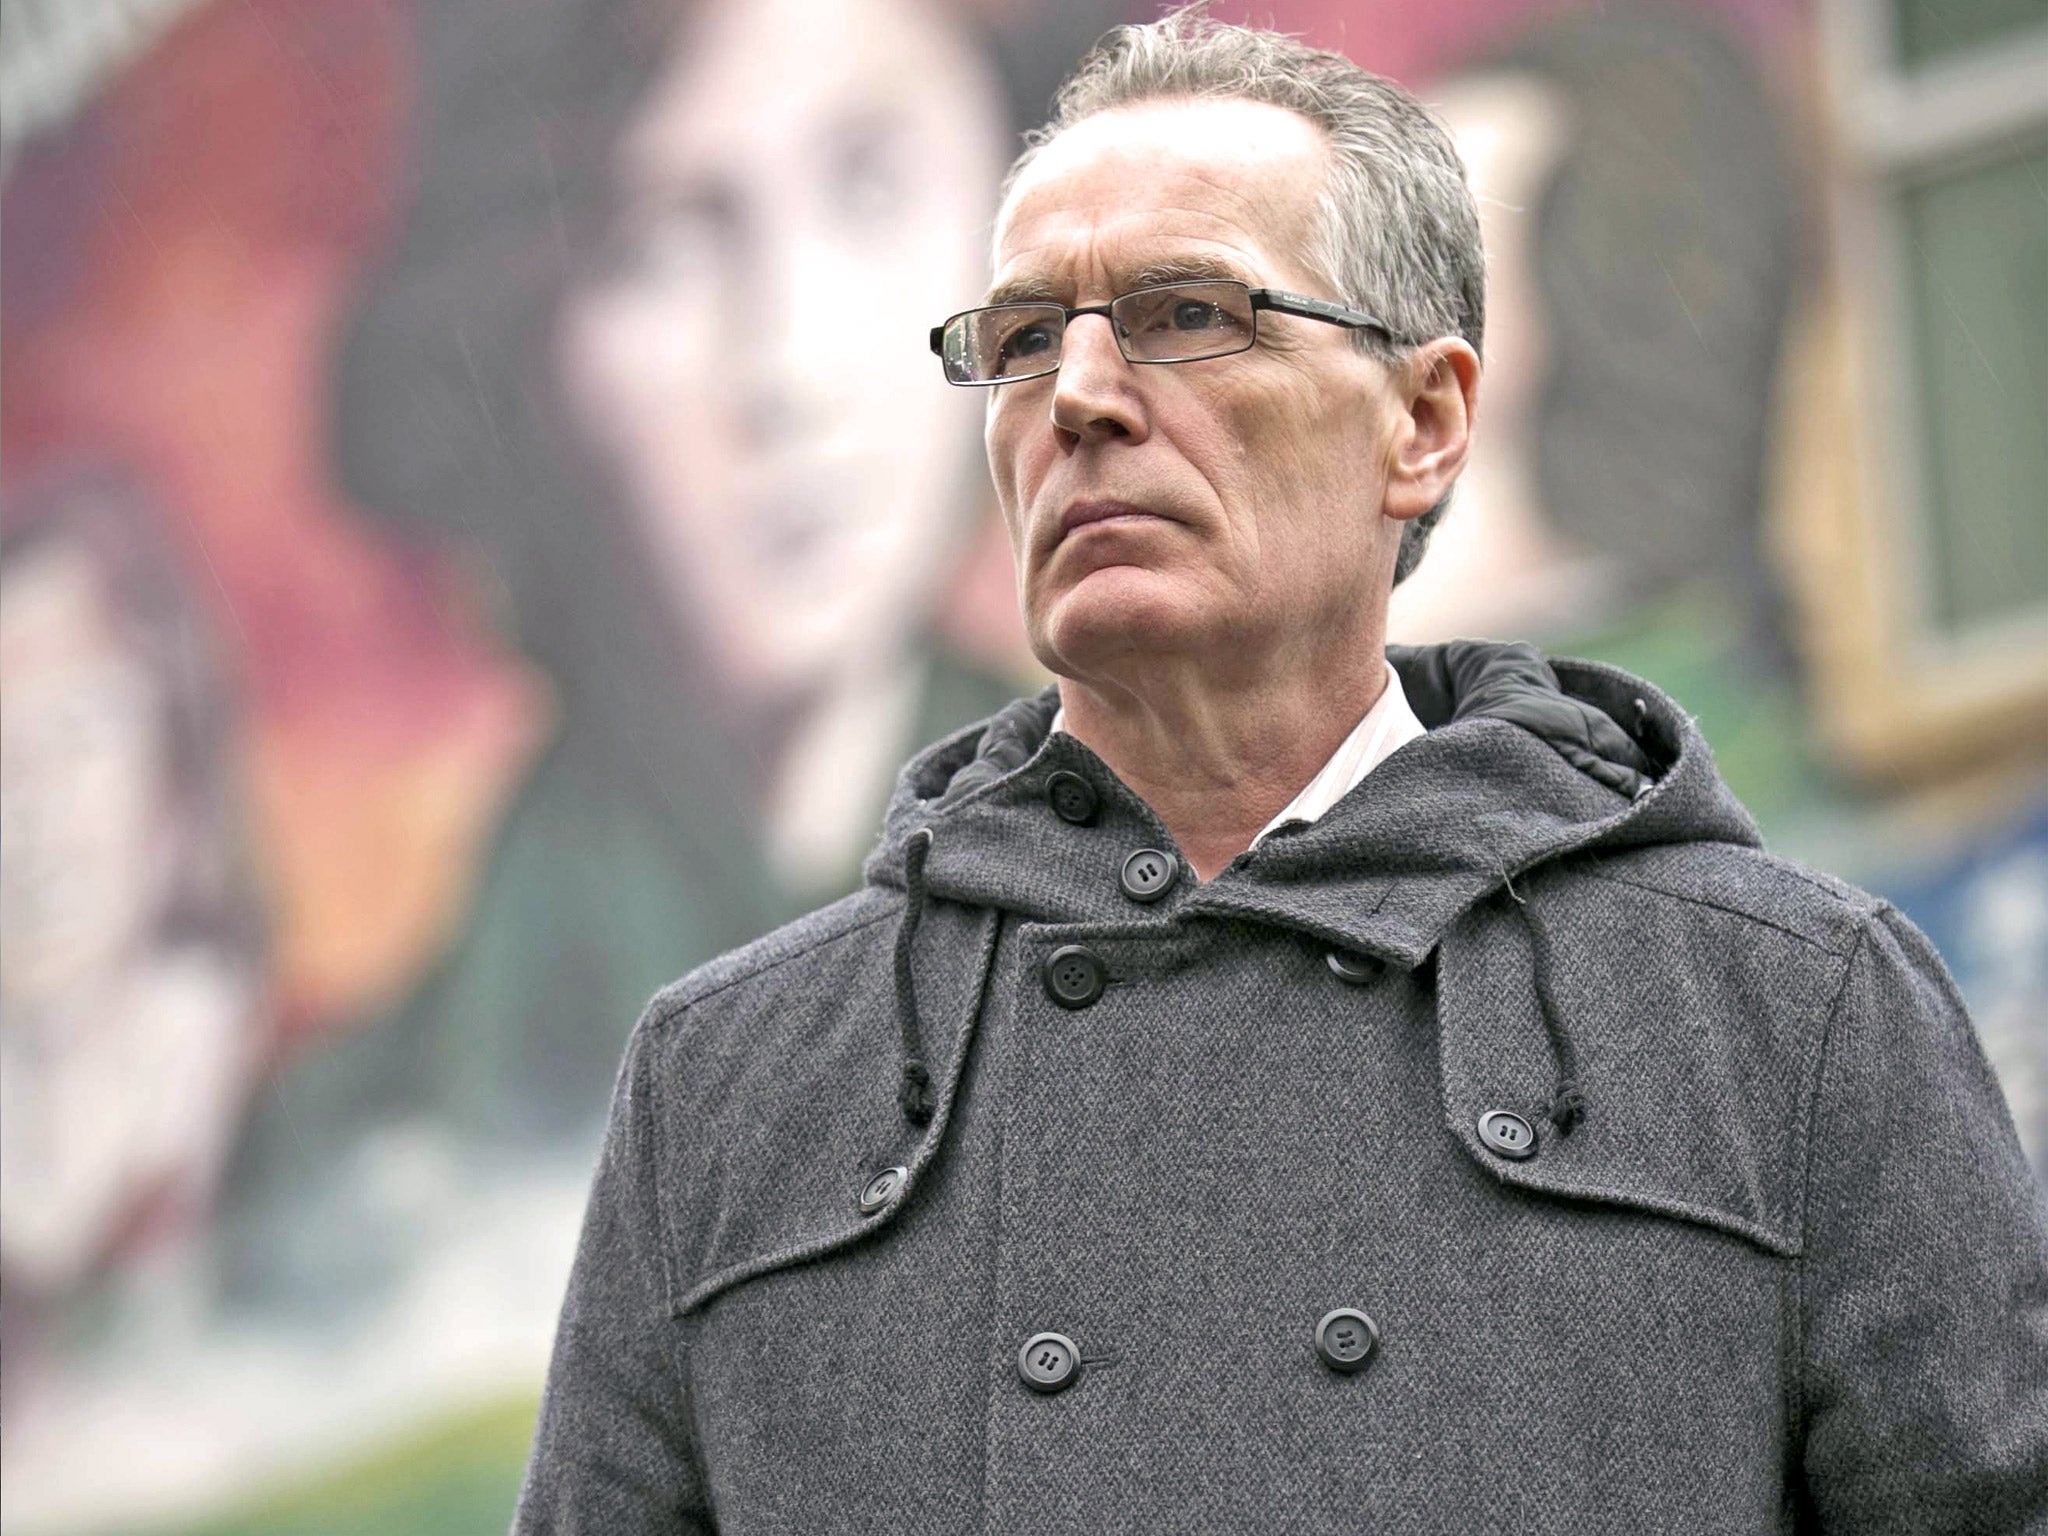 Gerry Kelly is now a member of the Northern Ireland Policing Board and once had responsibility for the now derelict Maze prison